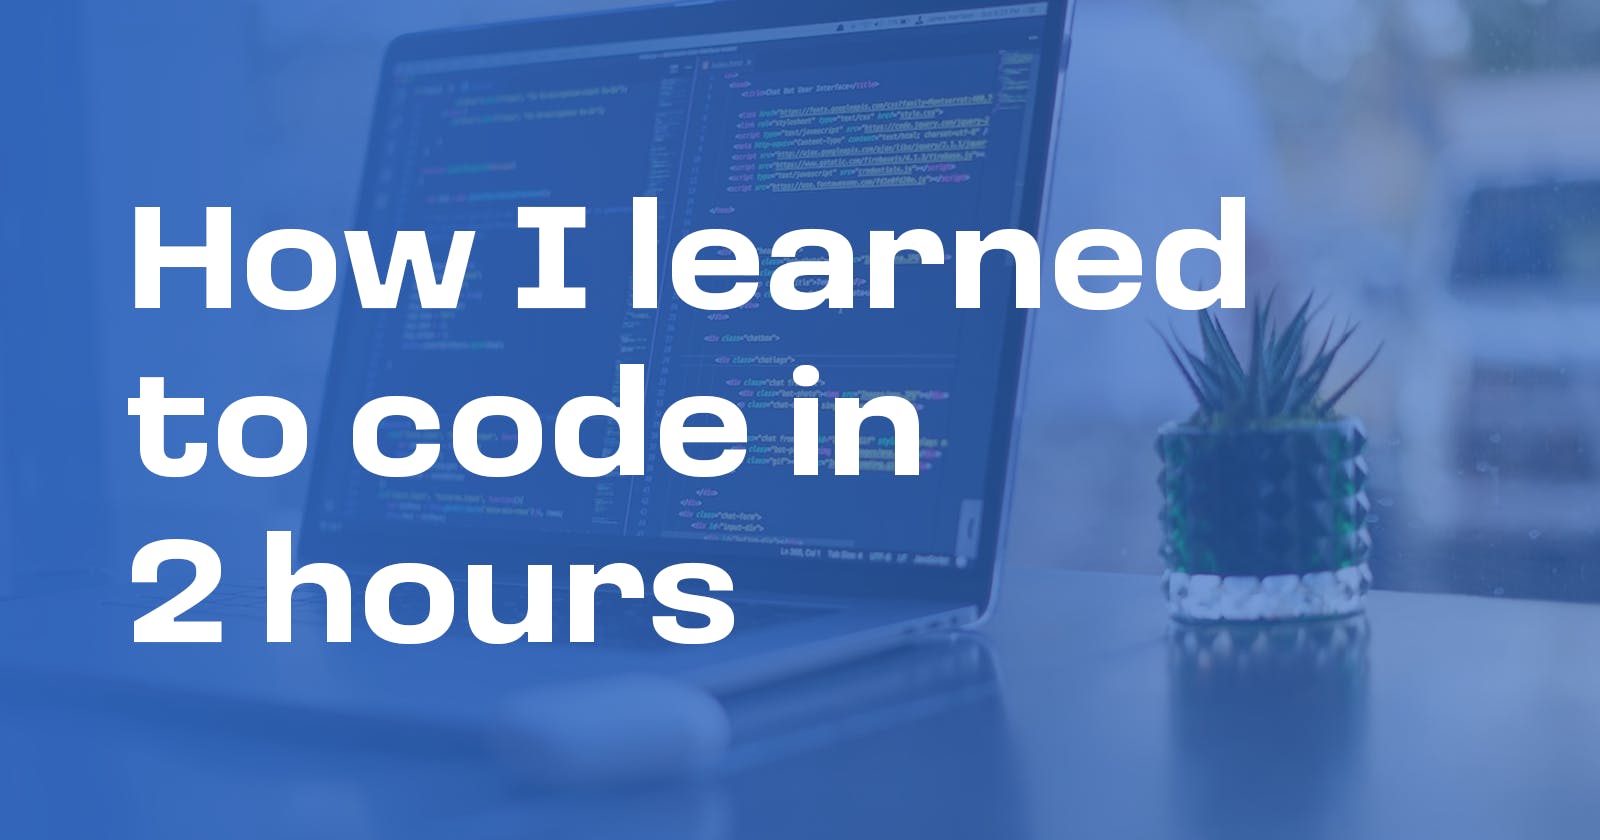 How I learned to code in 2 hours...